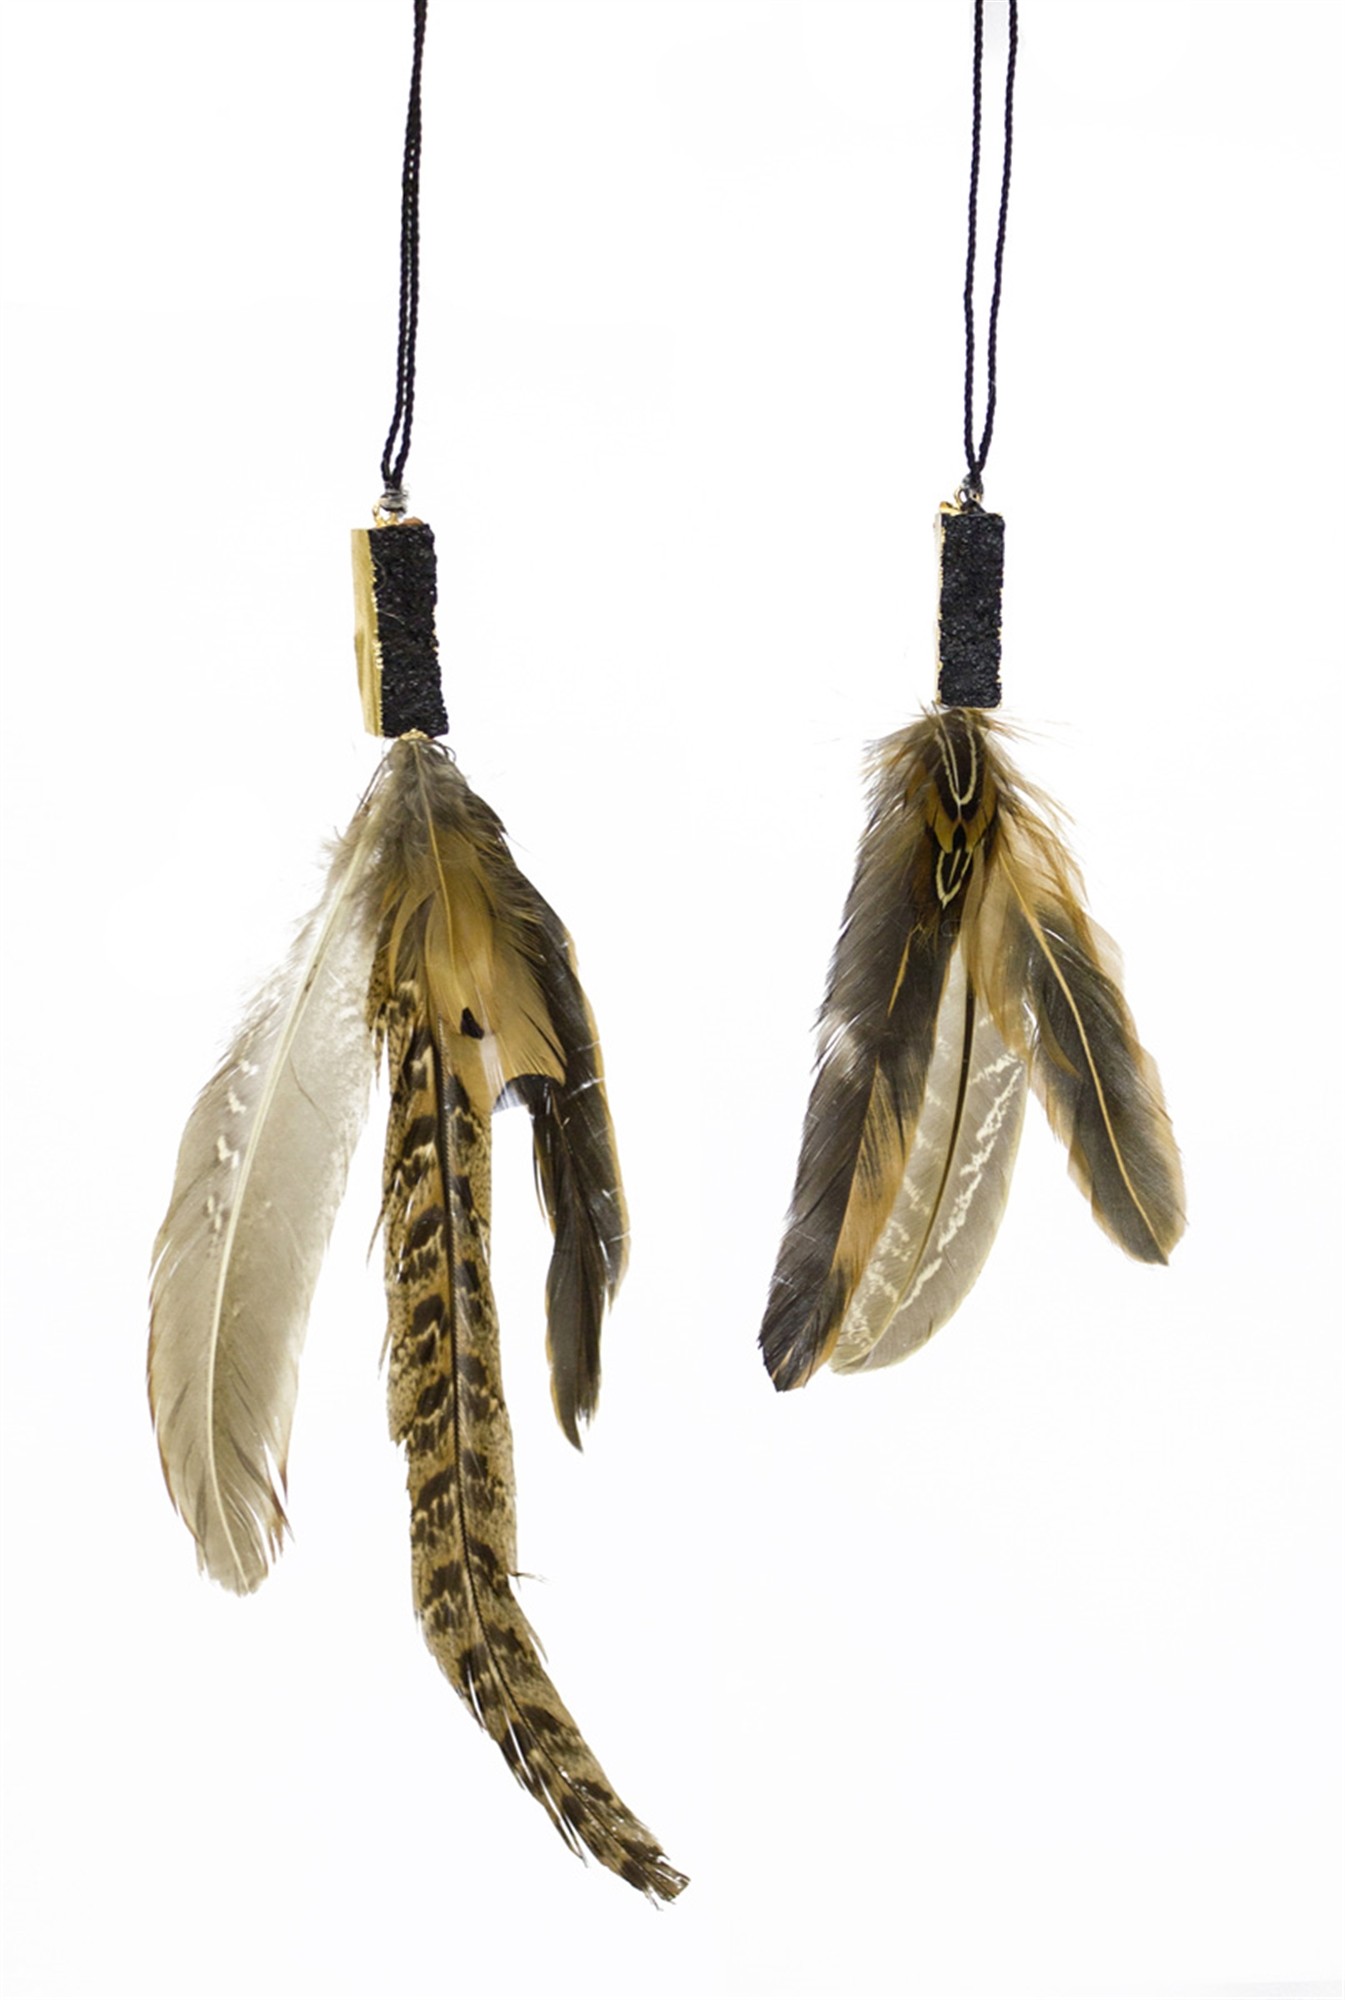 Feather Ornament (Set of 48) 7.25", 10"H Feather/Resin